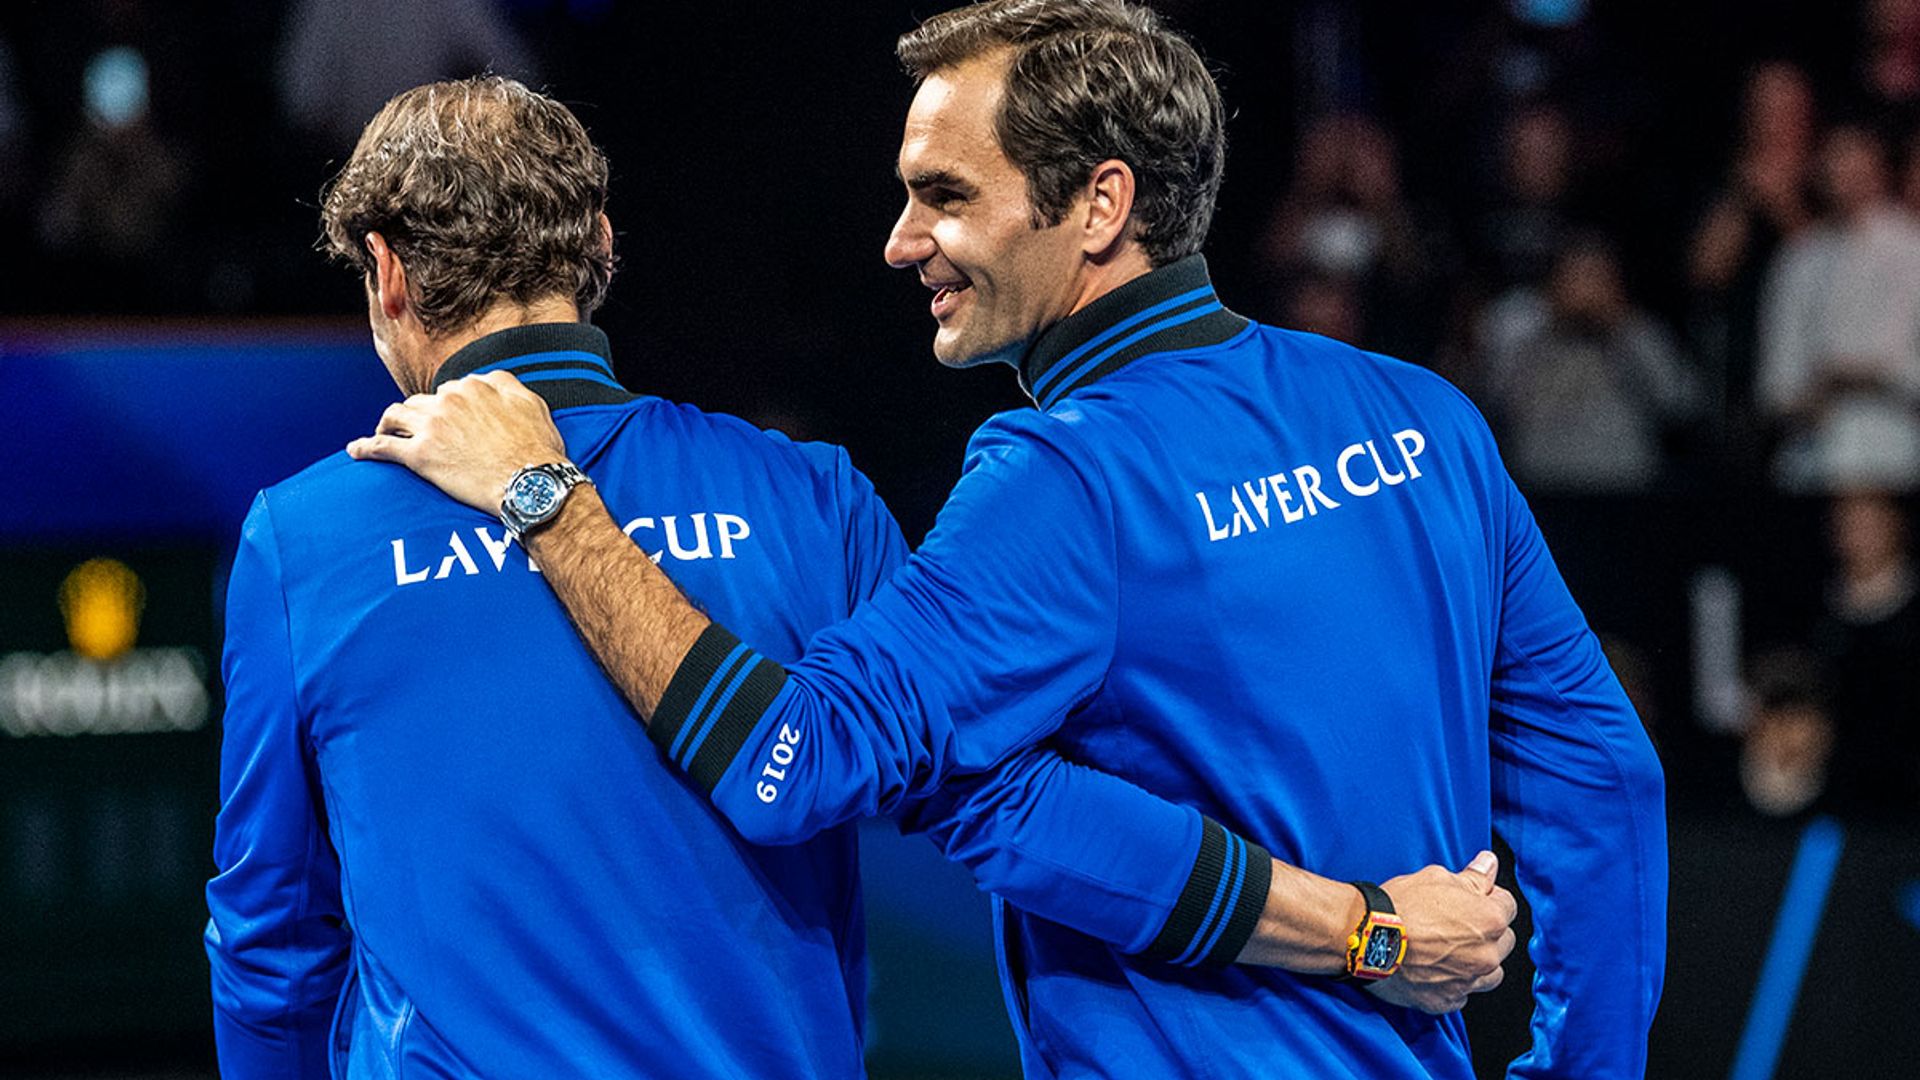 Laver Cup 2022 Everything to know about the tennis tournament